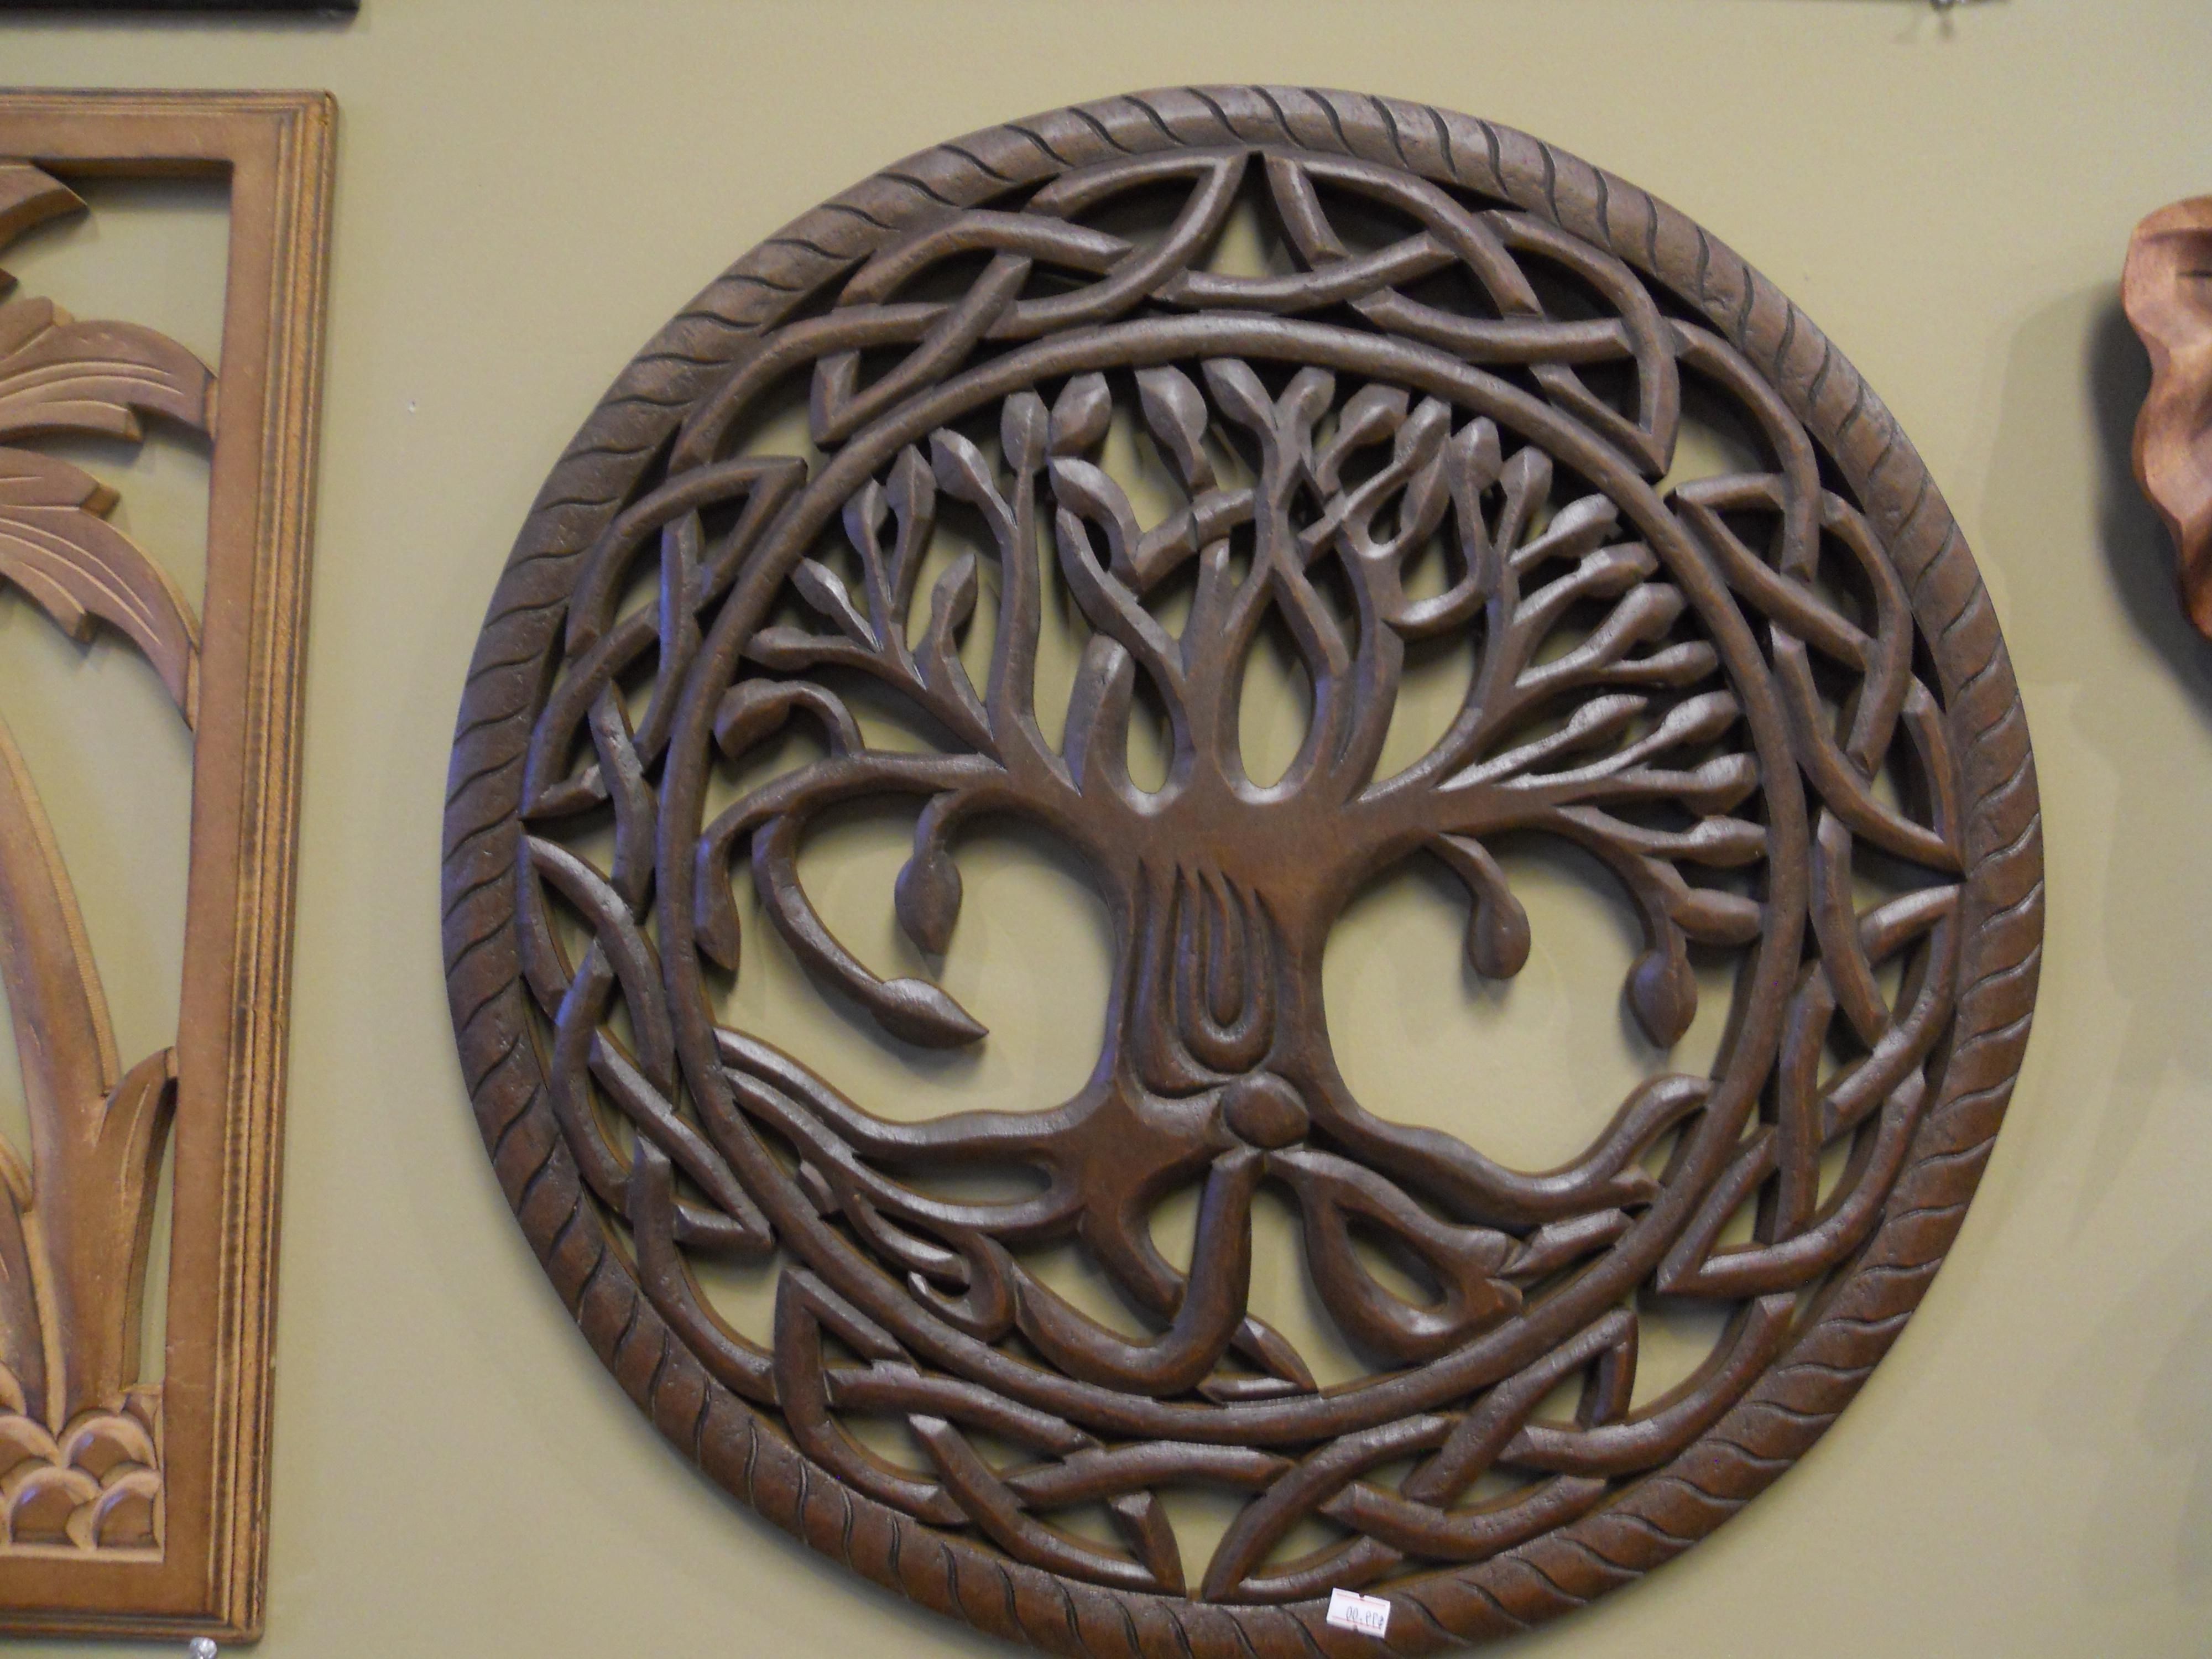 Most Recent Wall Art Designs: Carved Wood Wall Art Carved Tree Wall Art Carved With Tree Of Life Wood Carving Wall Art (View 1 of 15)